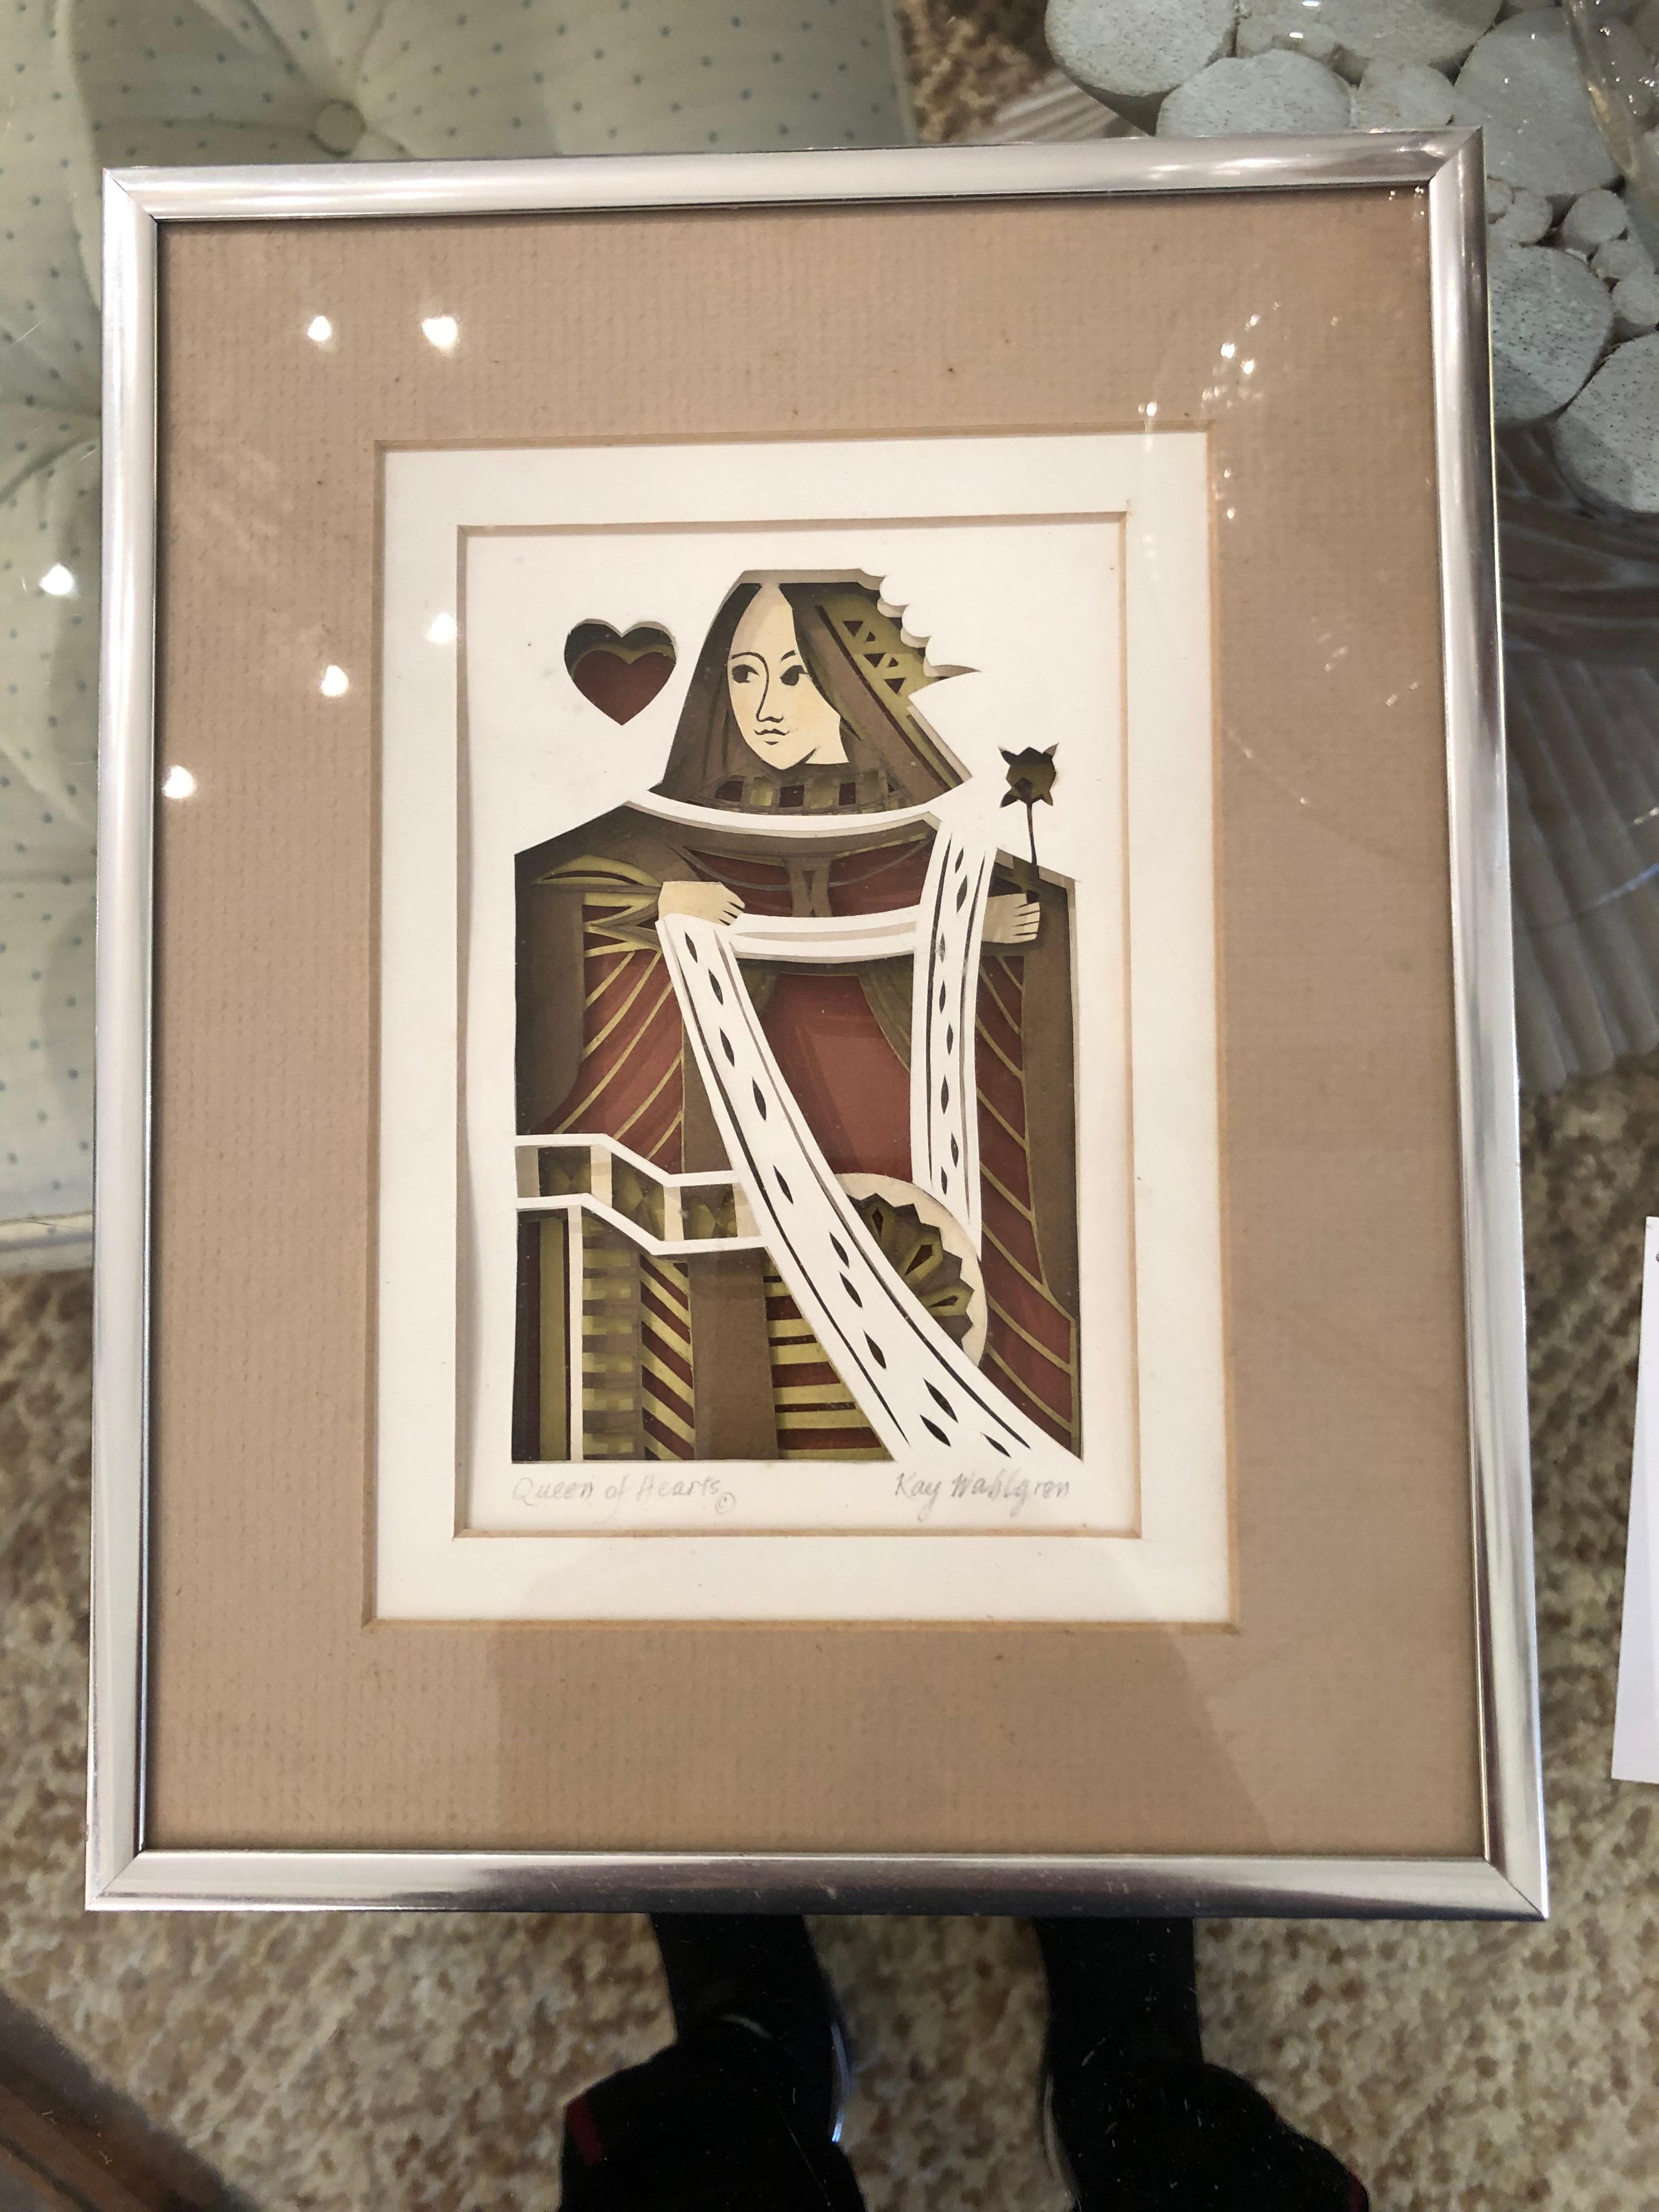 Late 20th Century Queen of Hearts Paper Sculpture by Kay Wahlgren For Sale